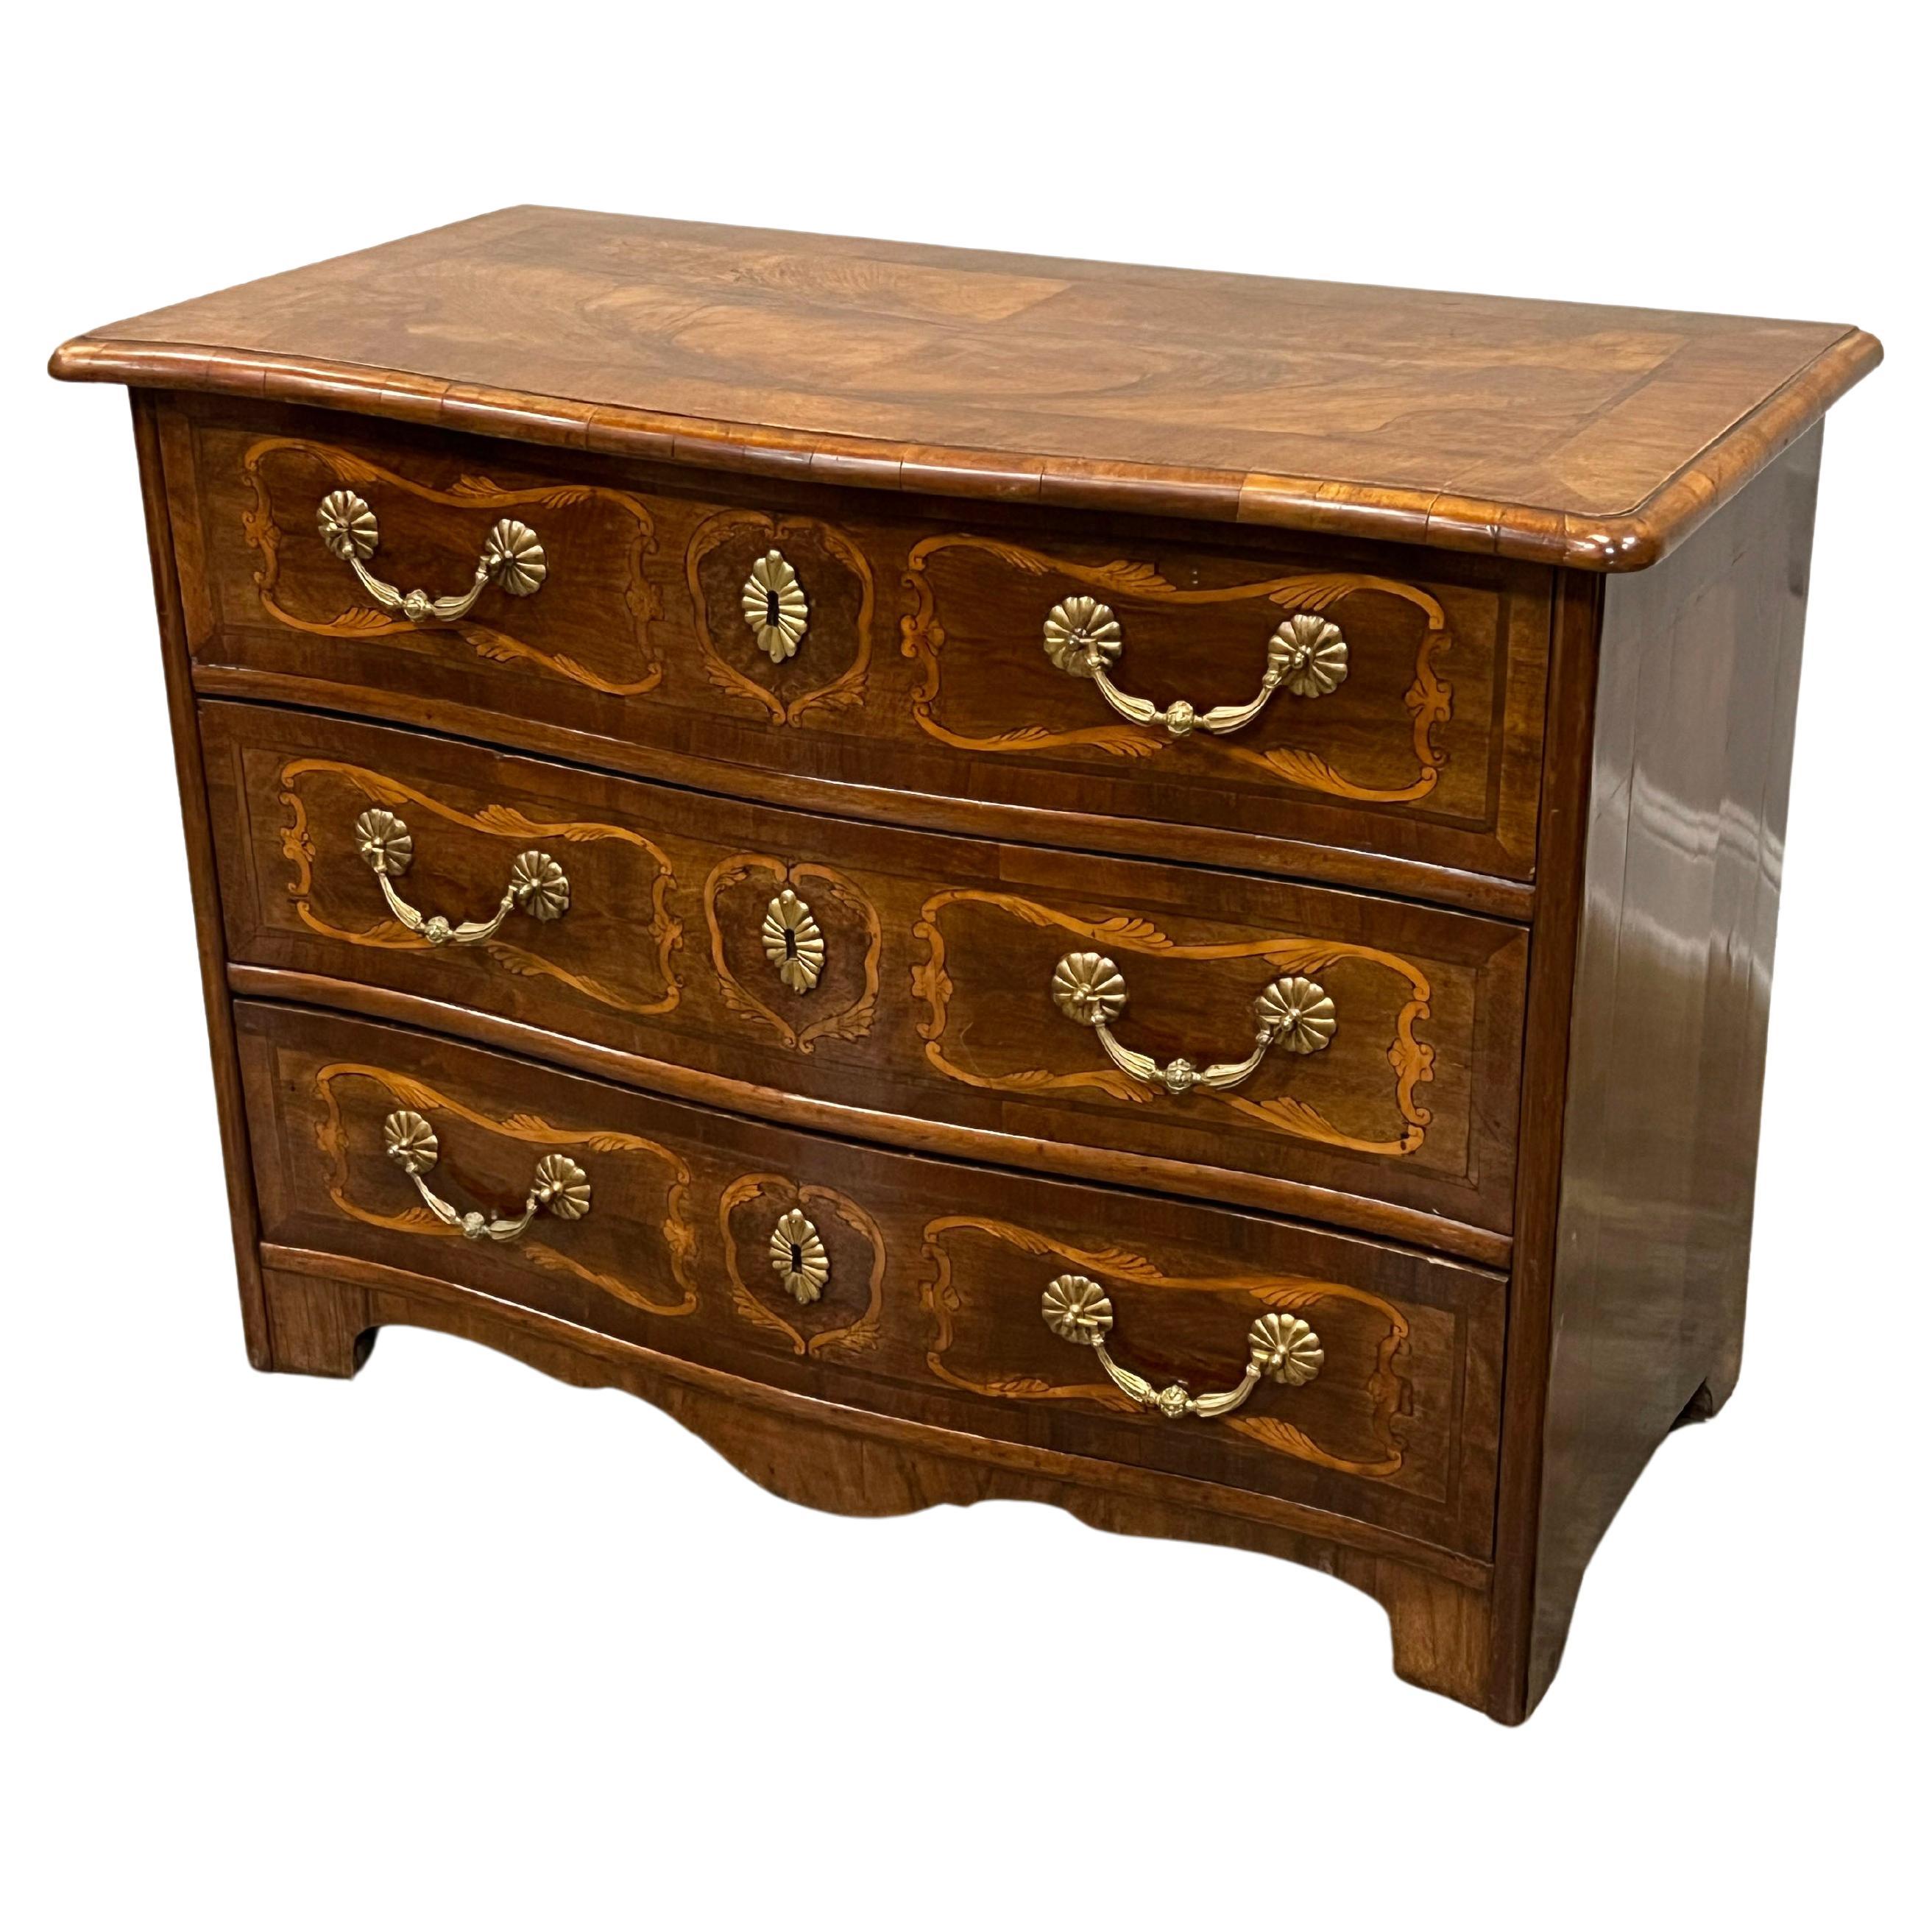 19th Century Inlaid Marquetry Commode In Walnut For Sale